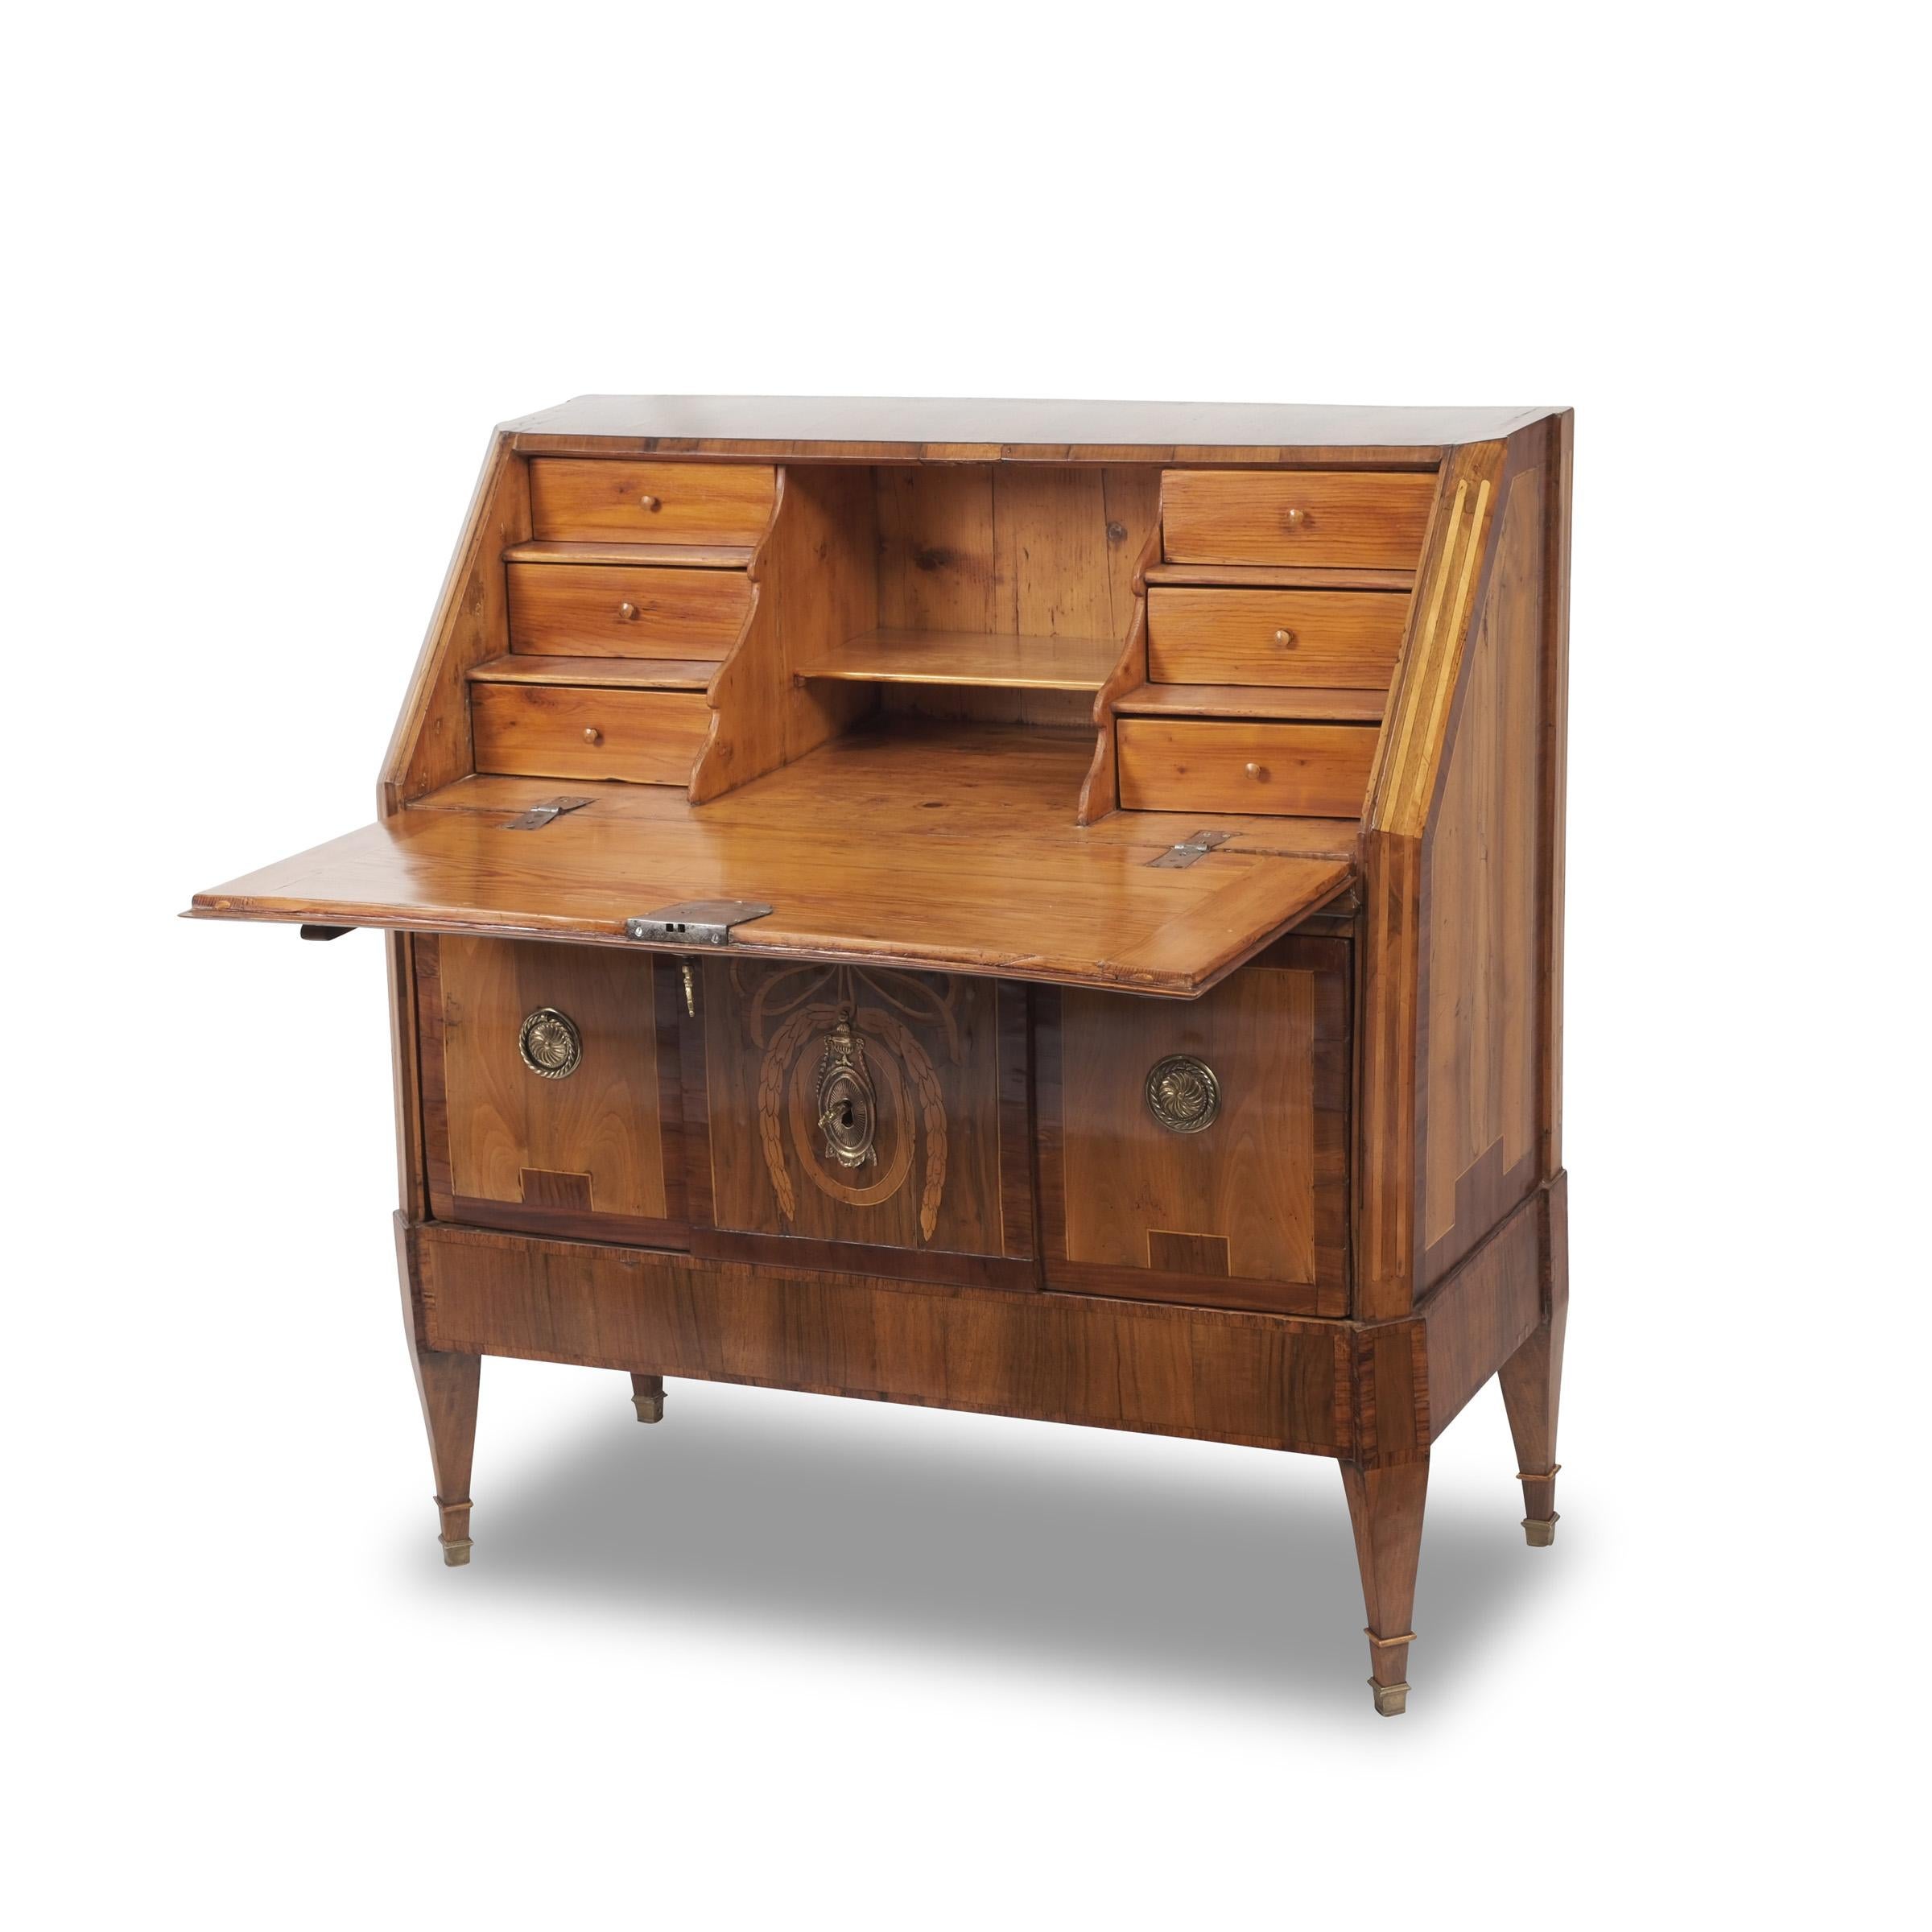 French 18th Century Louis Seize Rosewood and Walnut Secretaire Secretary For Sale